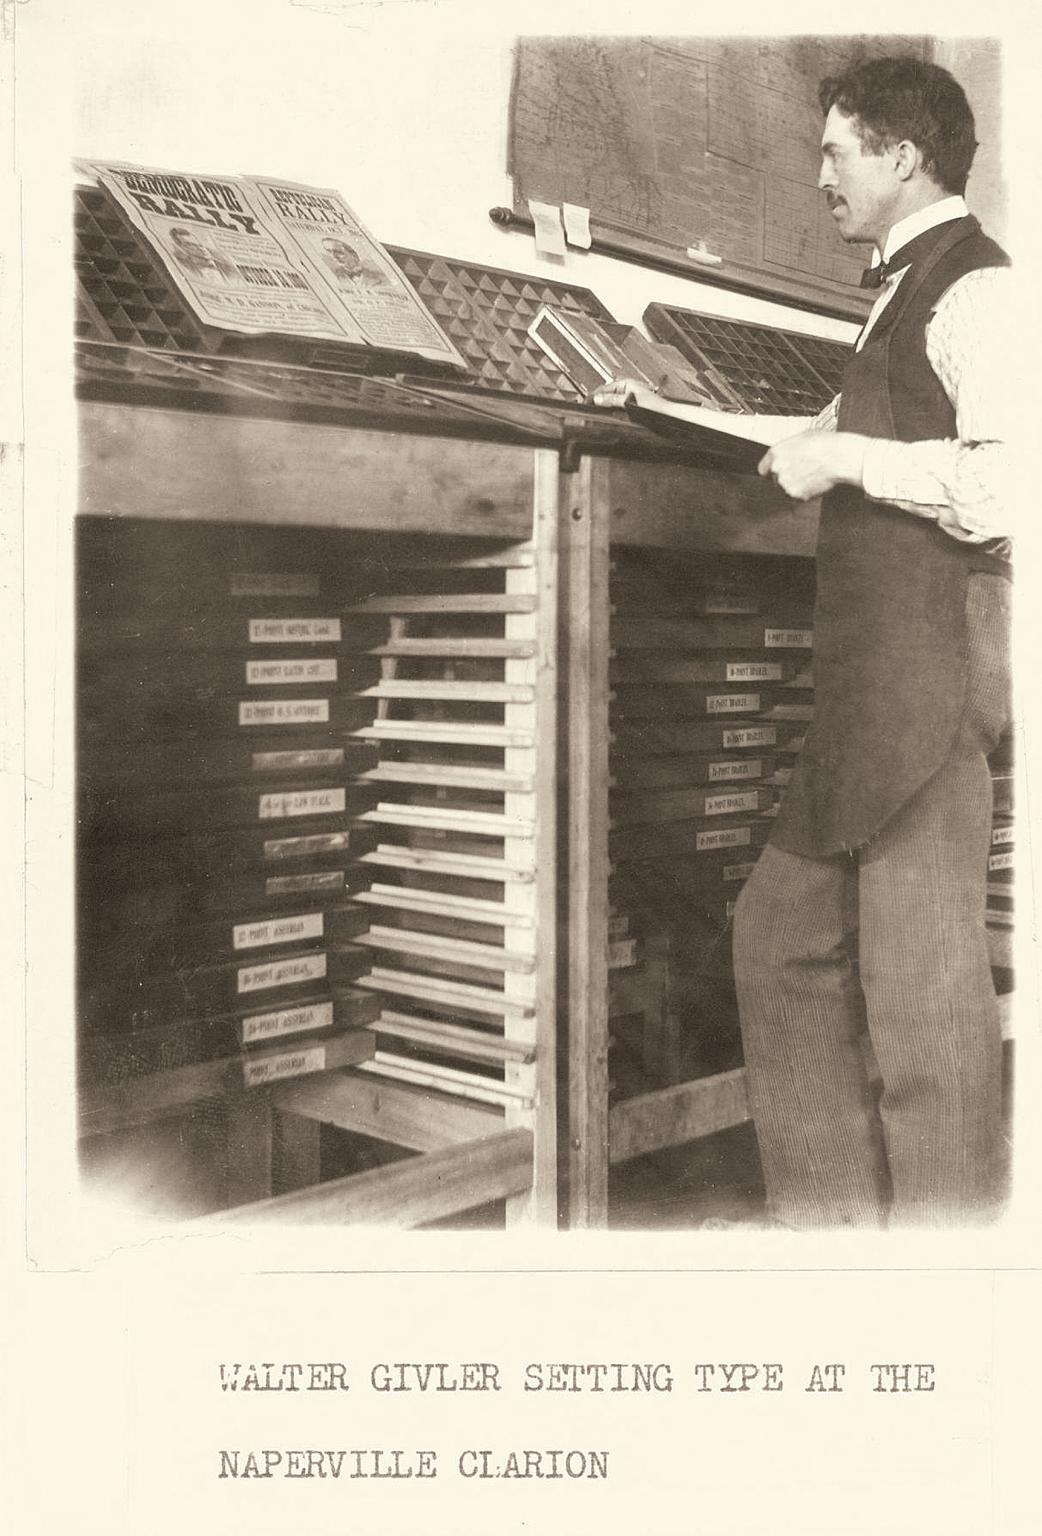 Walter Givler setting type at the "Naperville Clarion" newspaper, circa 1890s